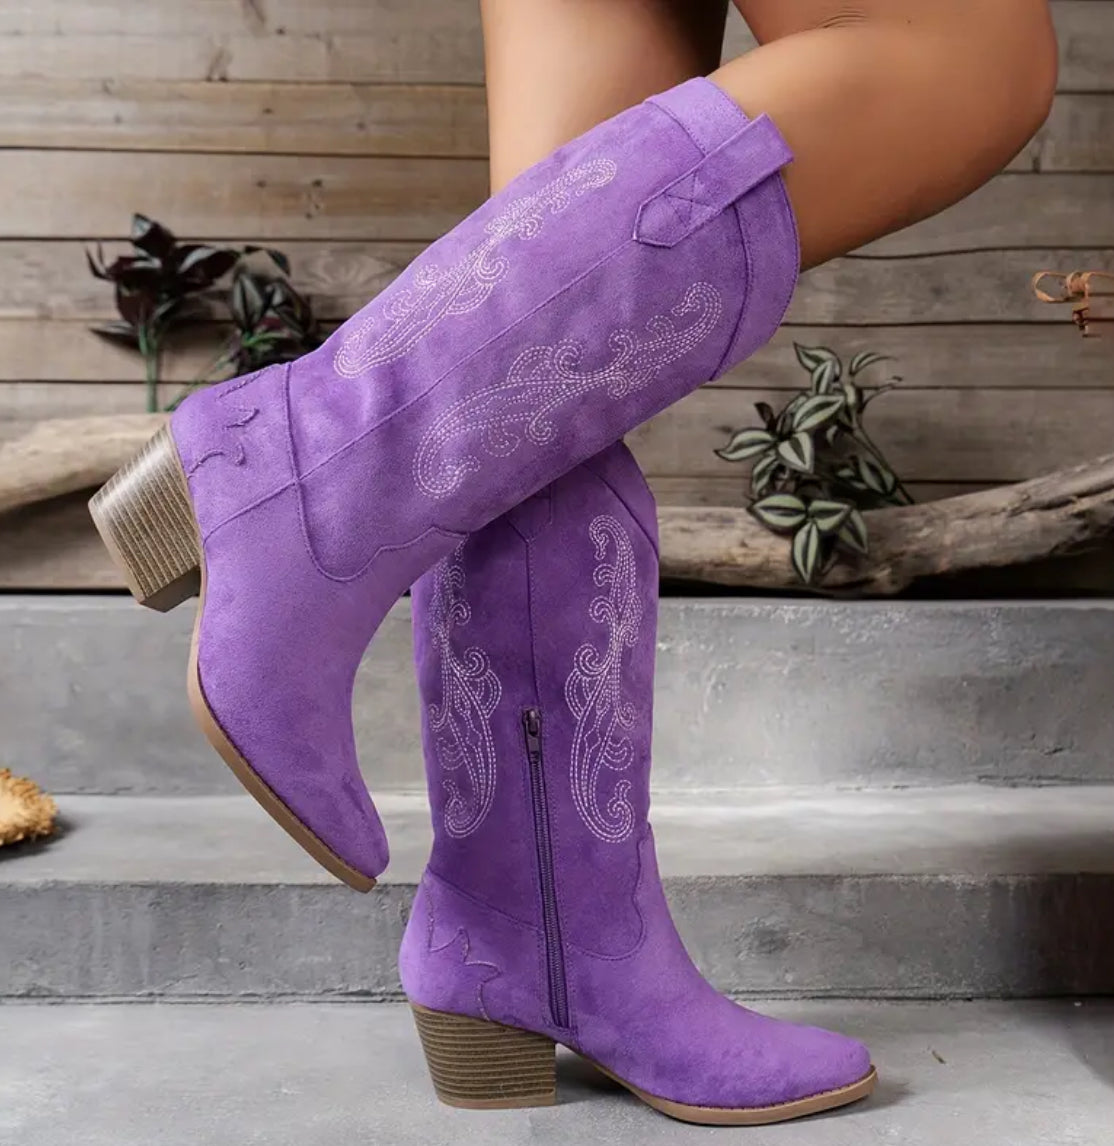 Chunky Heel Boots, Fashion Pointed Toe, Side Zipper Boots